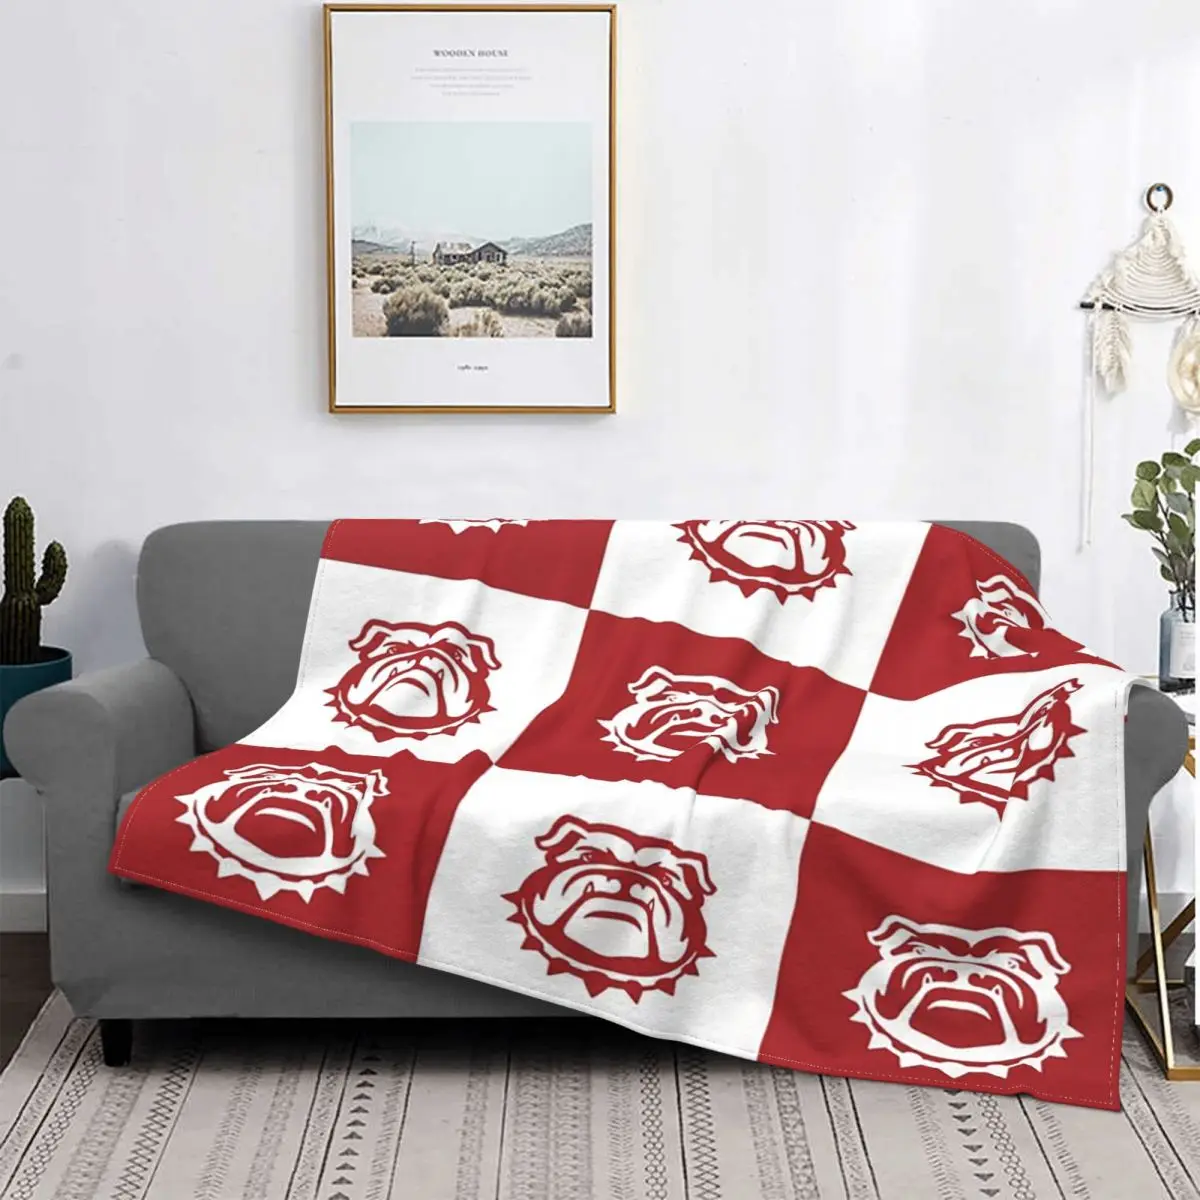 French Bulldog Dog Cute Puppy Plaid Blankets Flannel Spring Autumn Soft Throw Blankets for Bedding Office Plush Thin Quilt